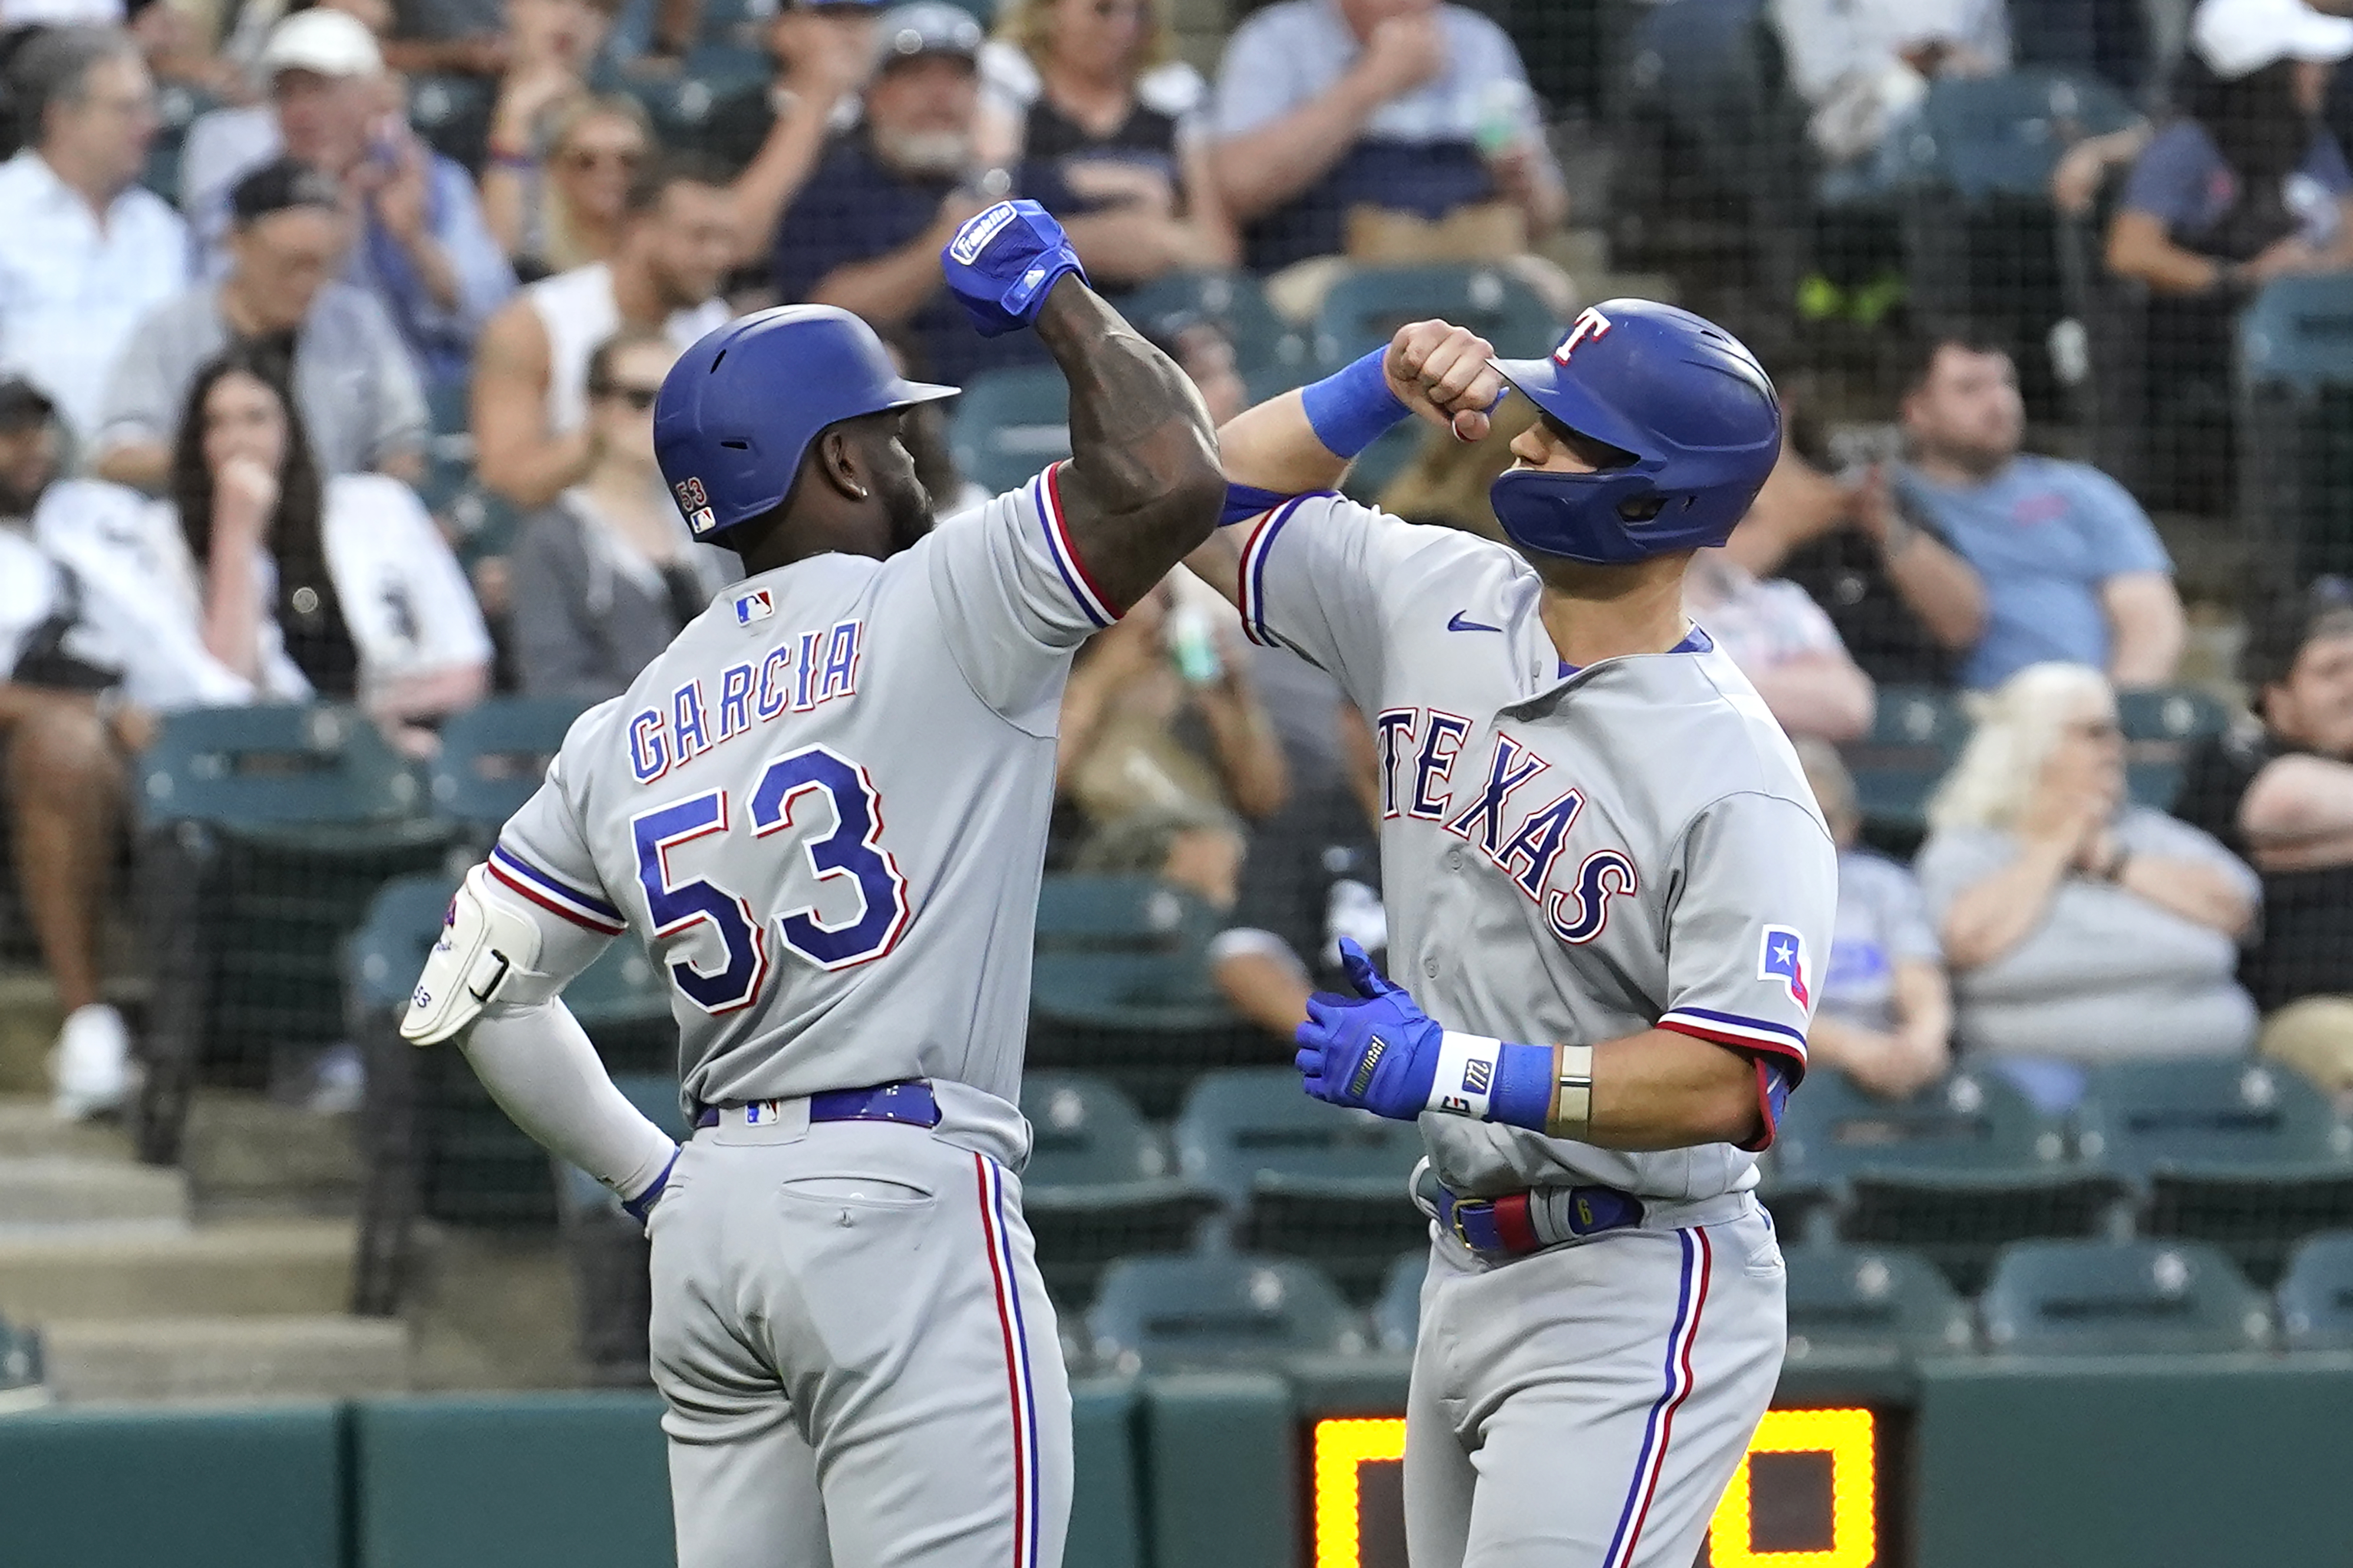 Rangers hang on to beat White Sox 5-2 – NBC 5 Dallas-Fort Worth